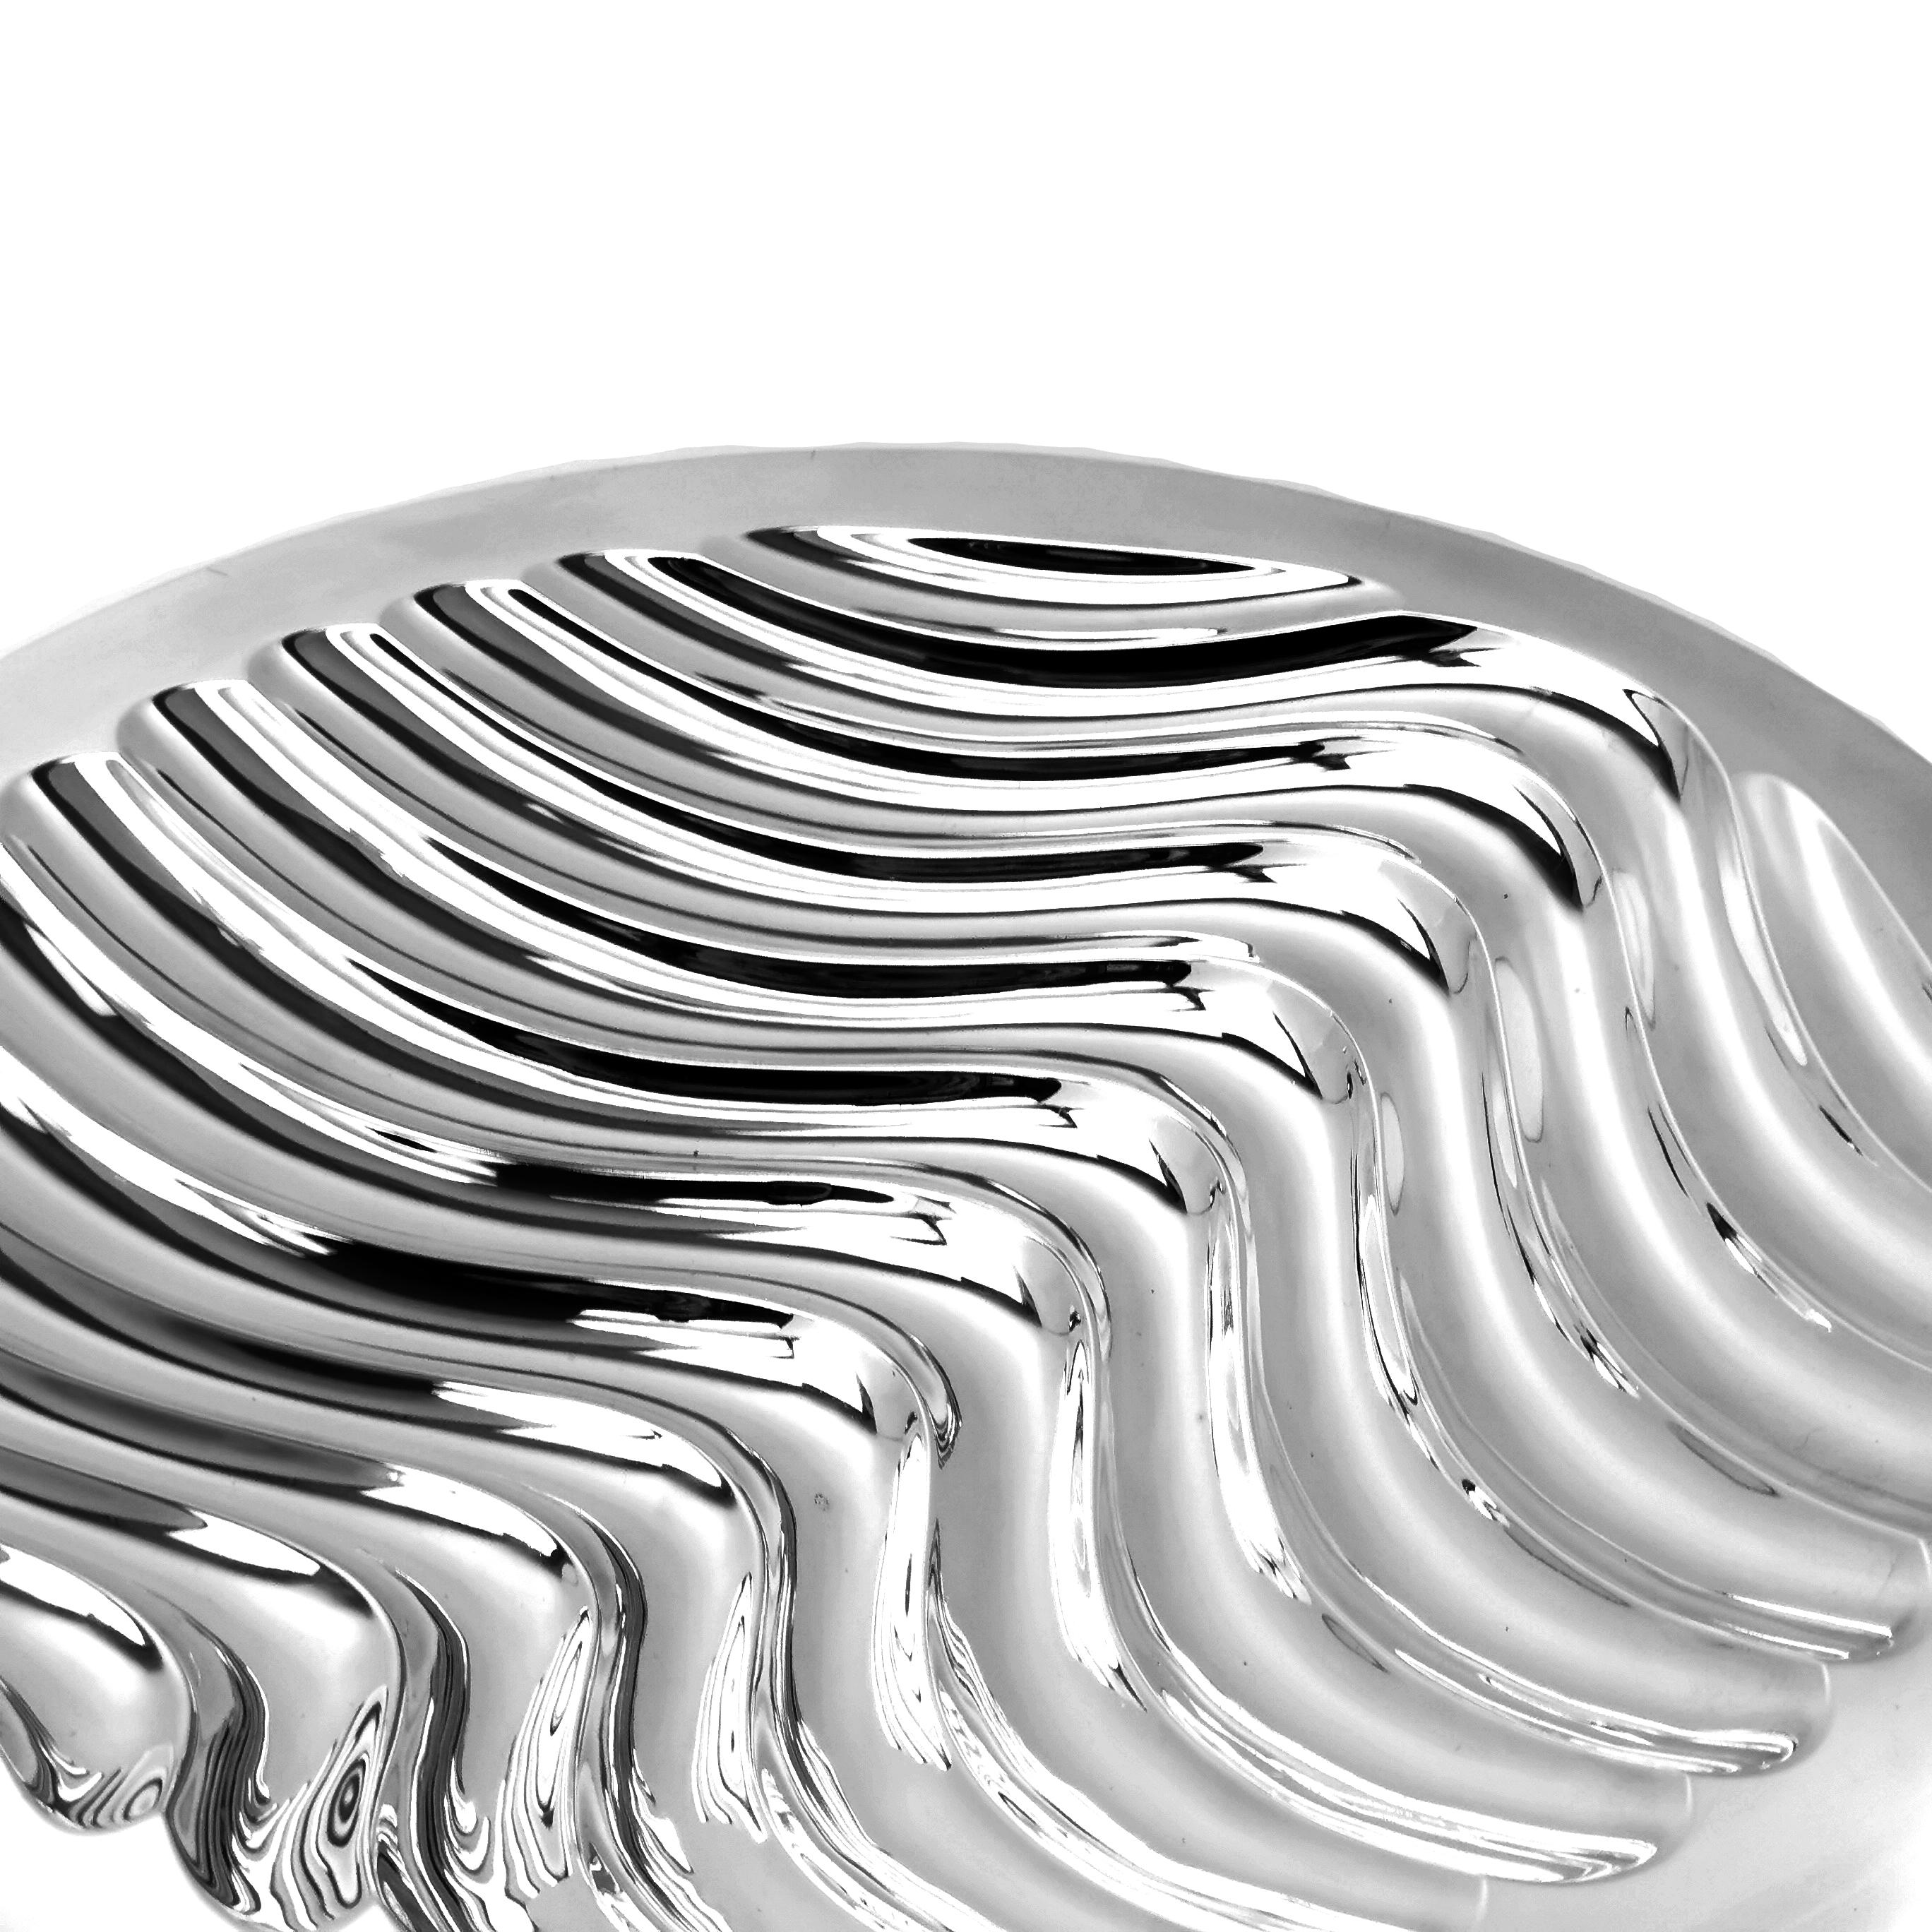 20th Century Contemporary Sterling Silver Bowl Round Double Skinned Wave Alex Brogden 1993 For Sale